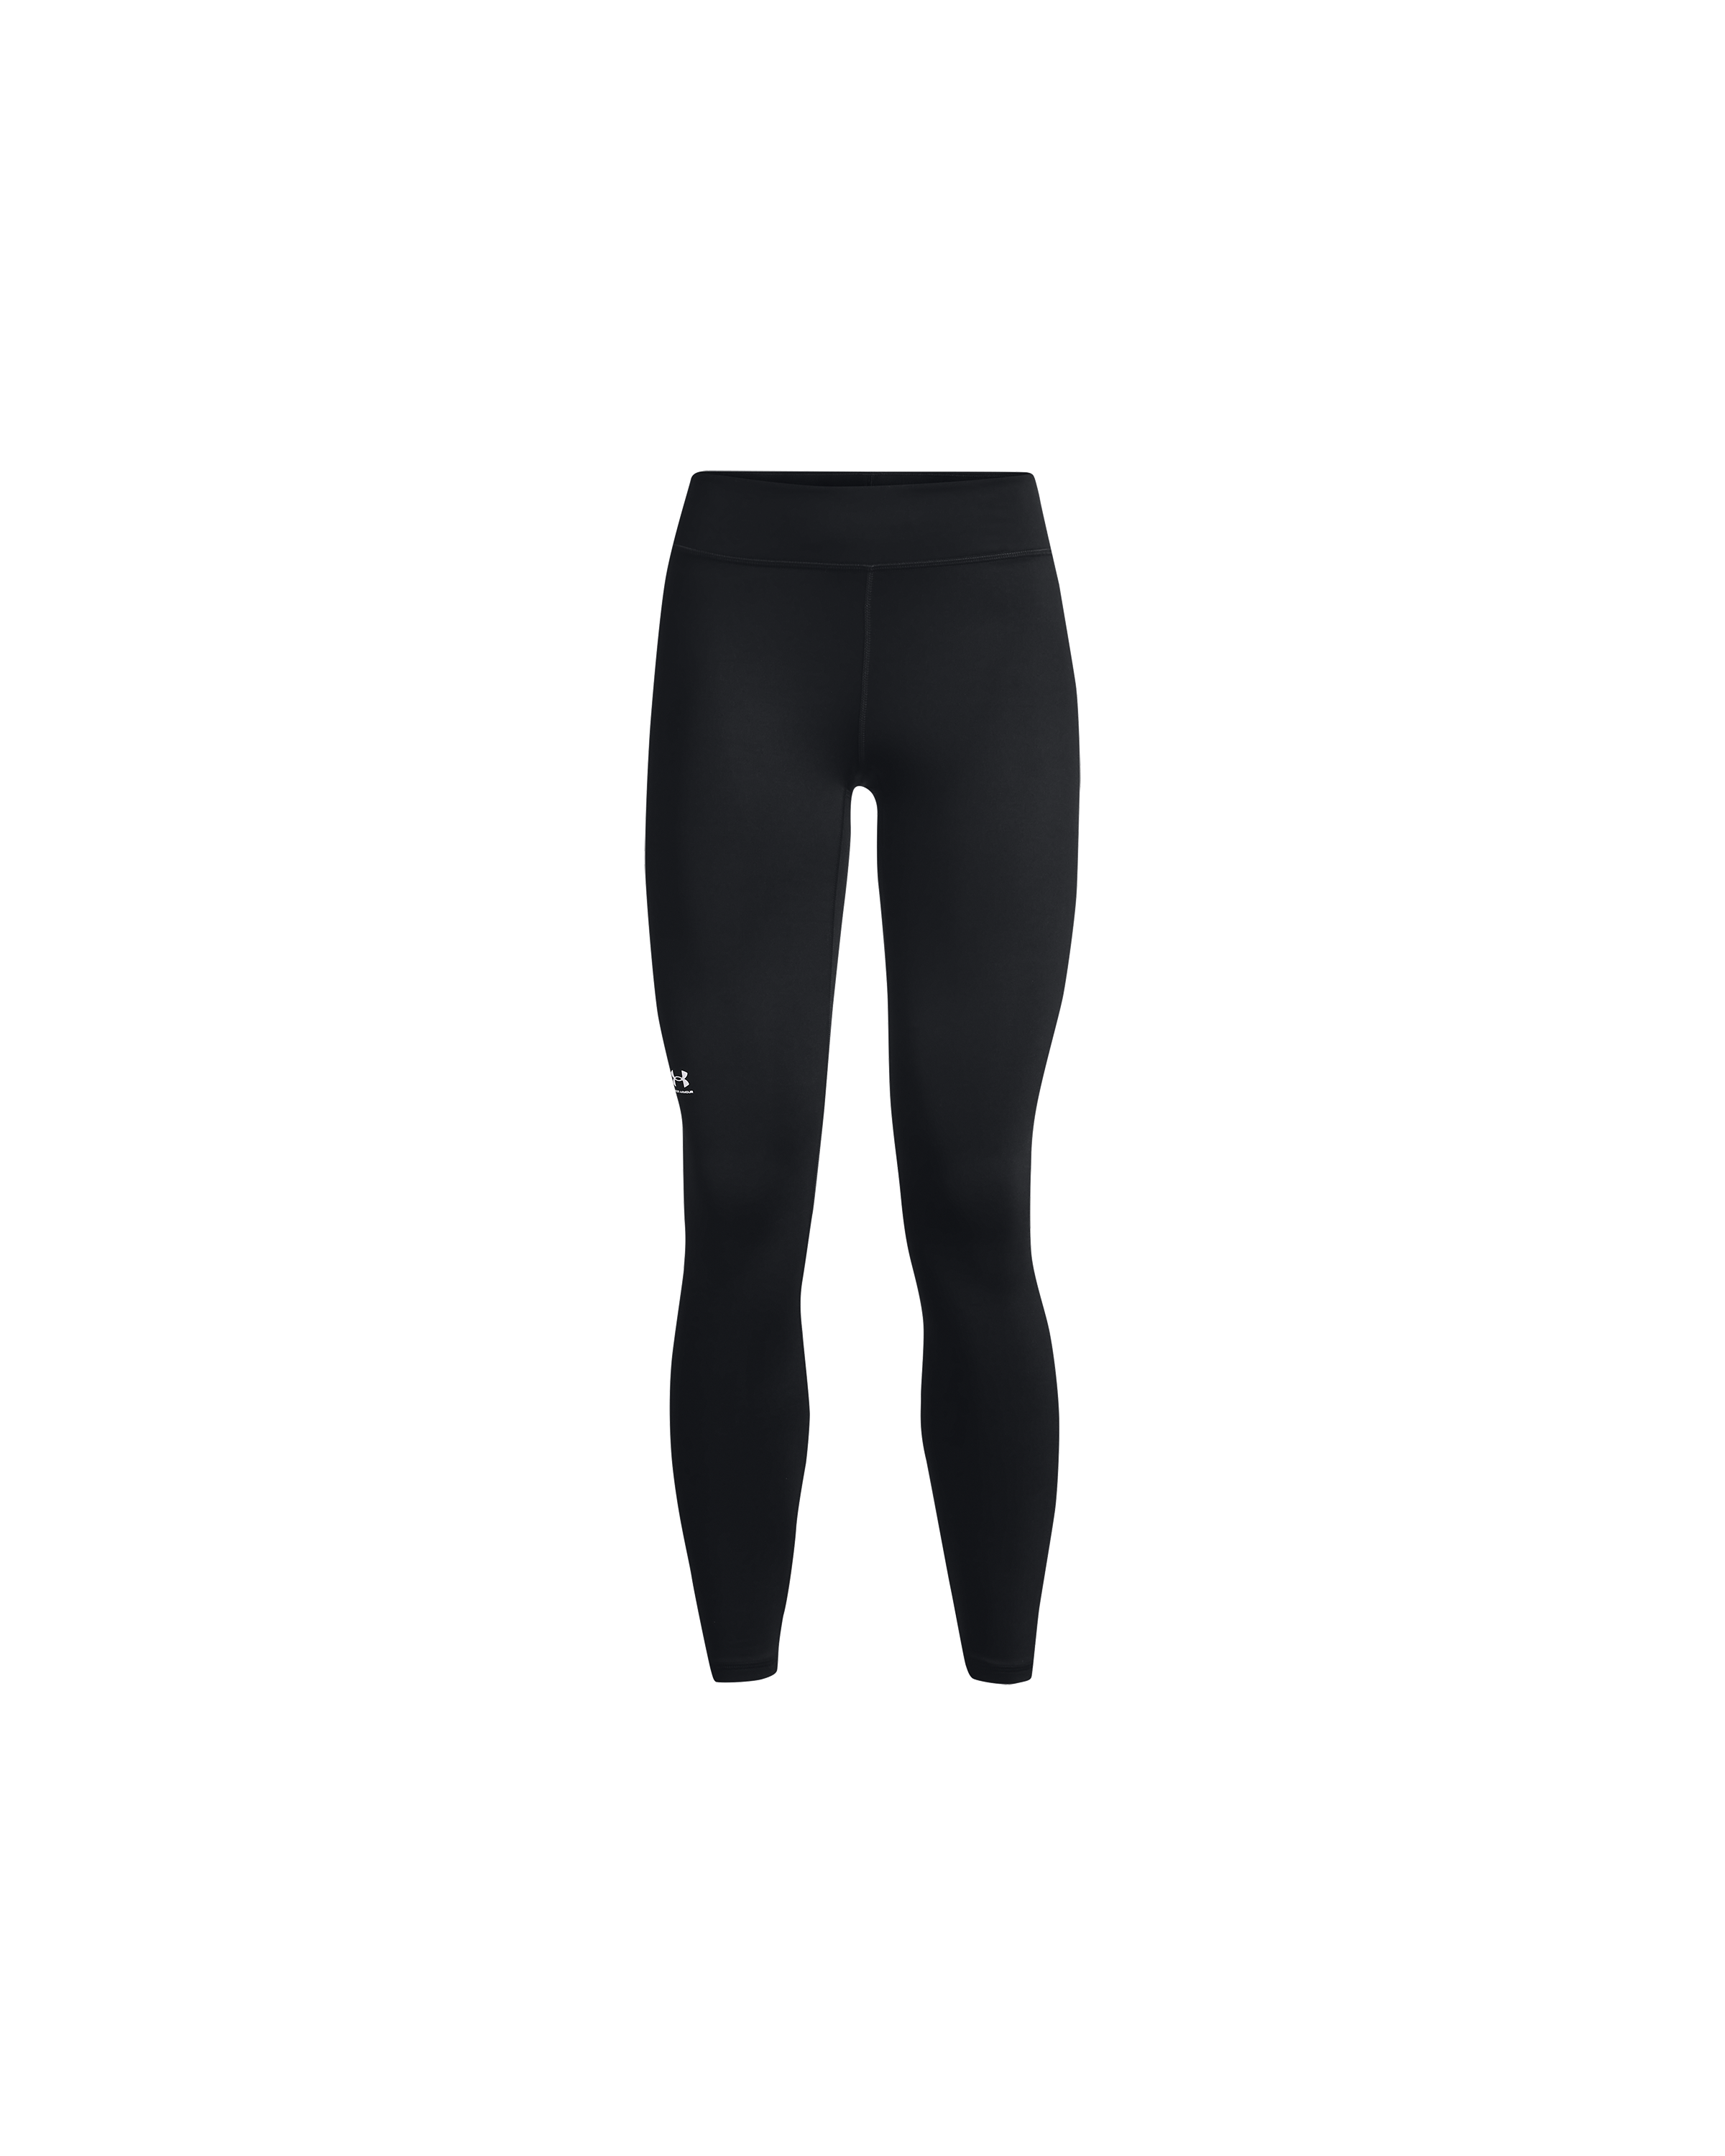 Under Armour Women's ColdGear Authentics Leggings with Brushed Interior